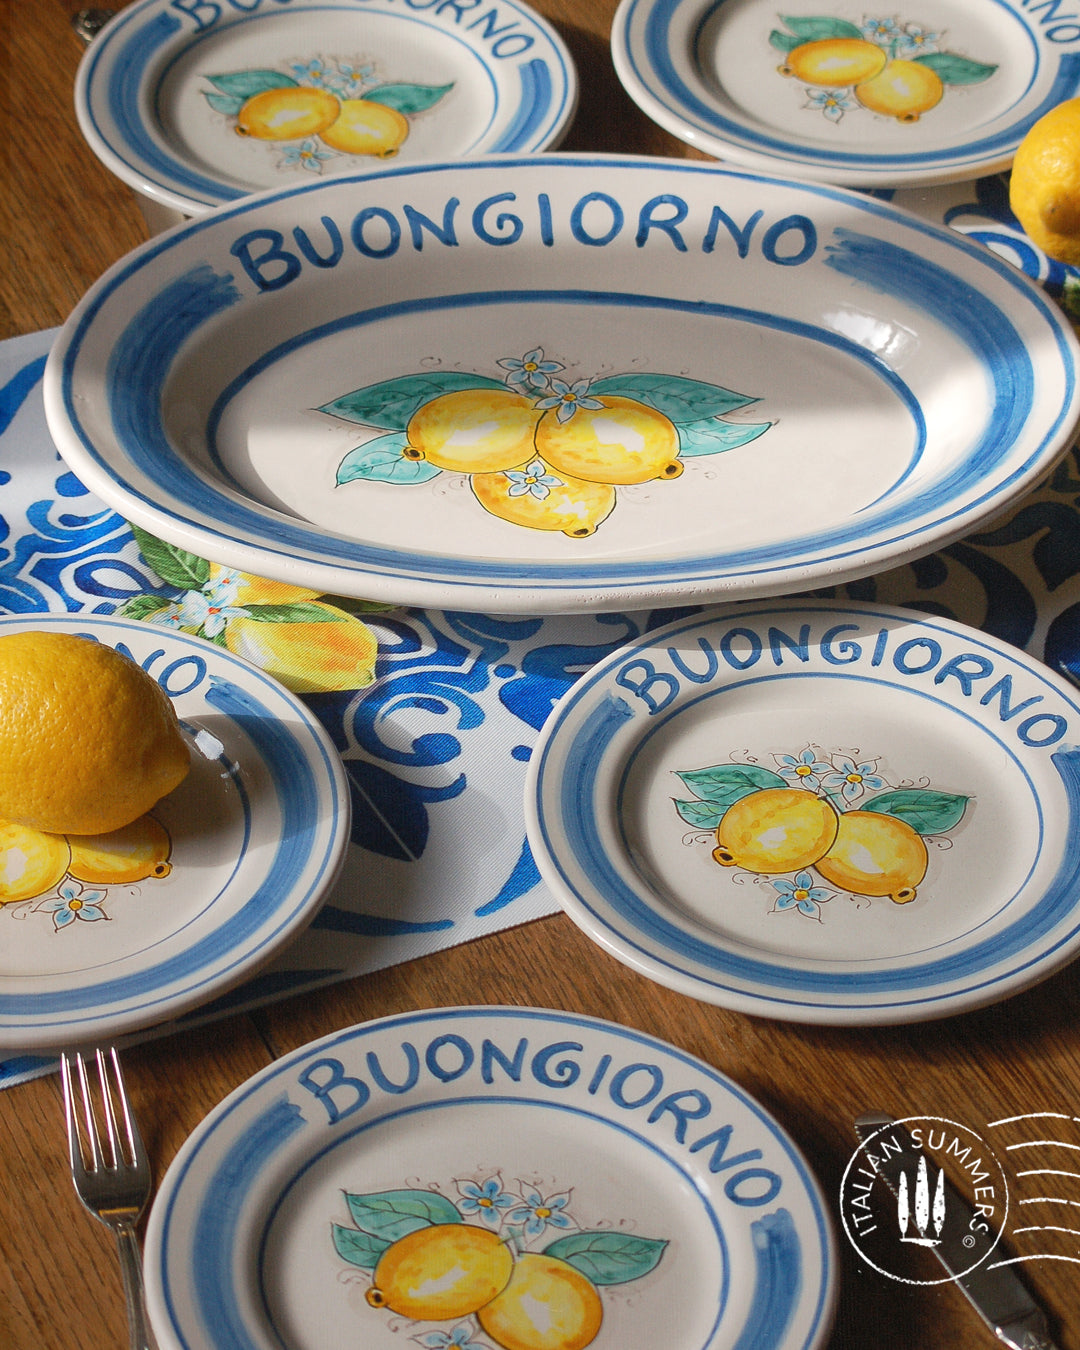 Ceramic plate Buongiorno Limoni handpainted in Sicily. This  plate has the quote Biongiorno on the rim - handpainted  - And colorfull lemons on the center of the plate  with lemon flowers. On the rim of the plate there are blue paint stripes. The blue color is ultra marine. This plate is designed and sold by Italian Summers.